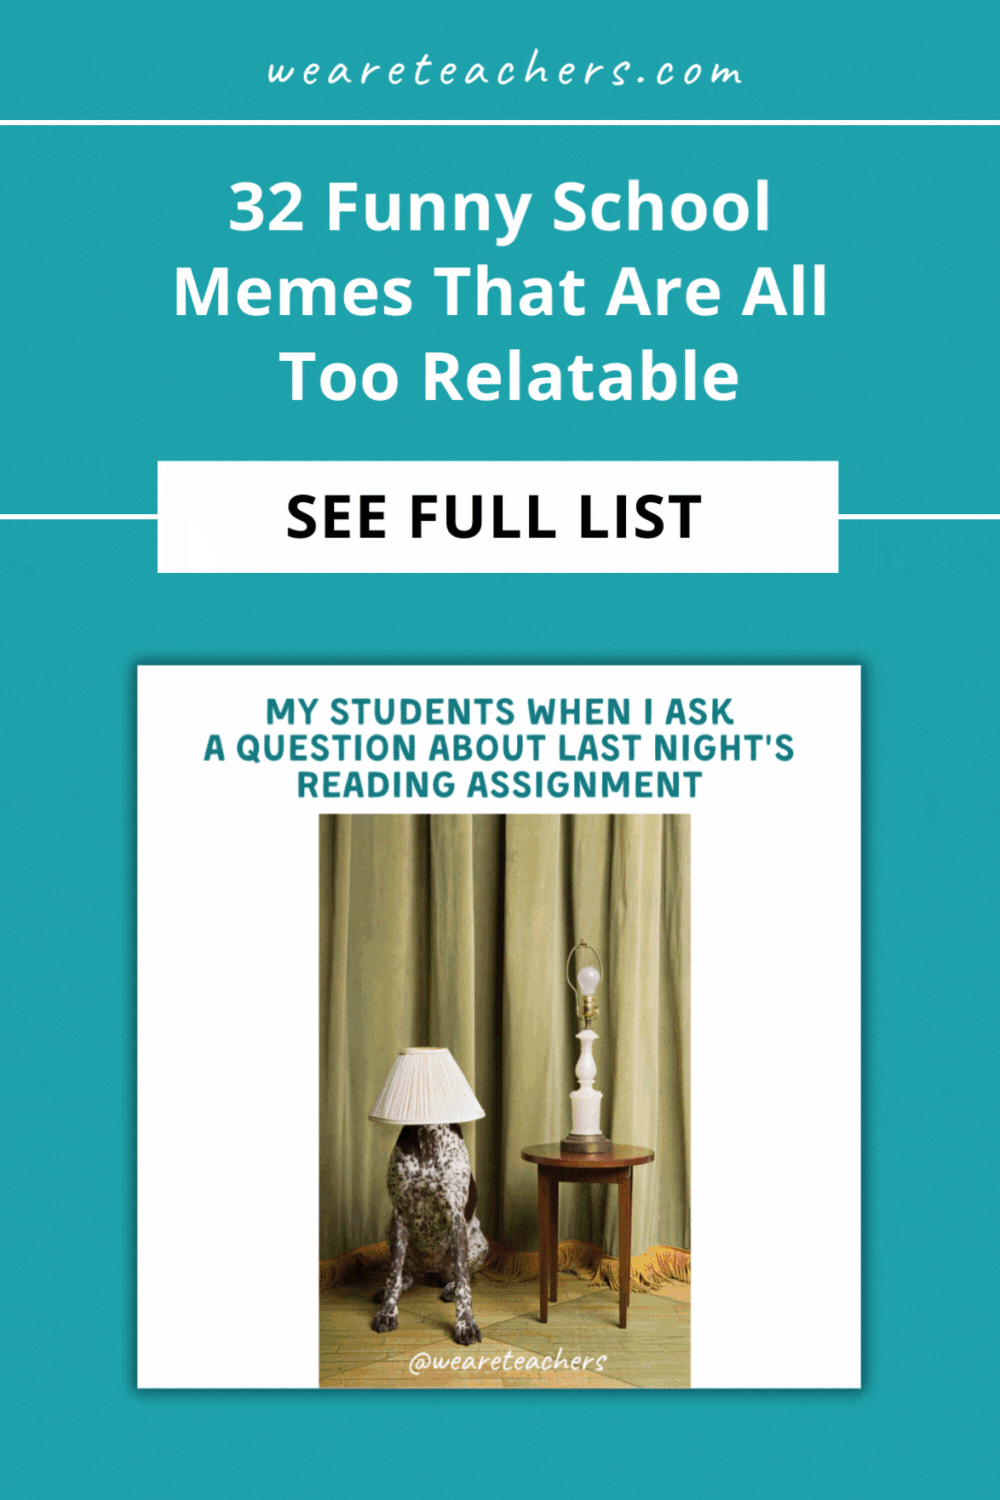 You're sure to get a chuckle out of these funny school memes that include everything from classroom stories to parking lots and textbooks.